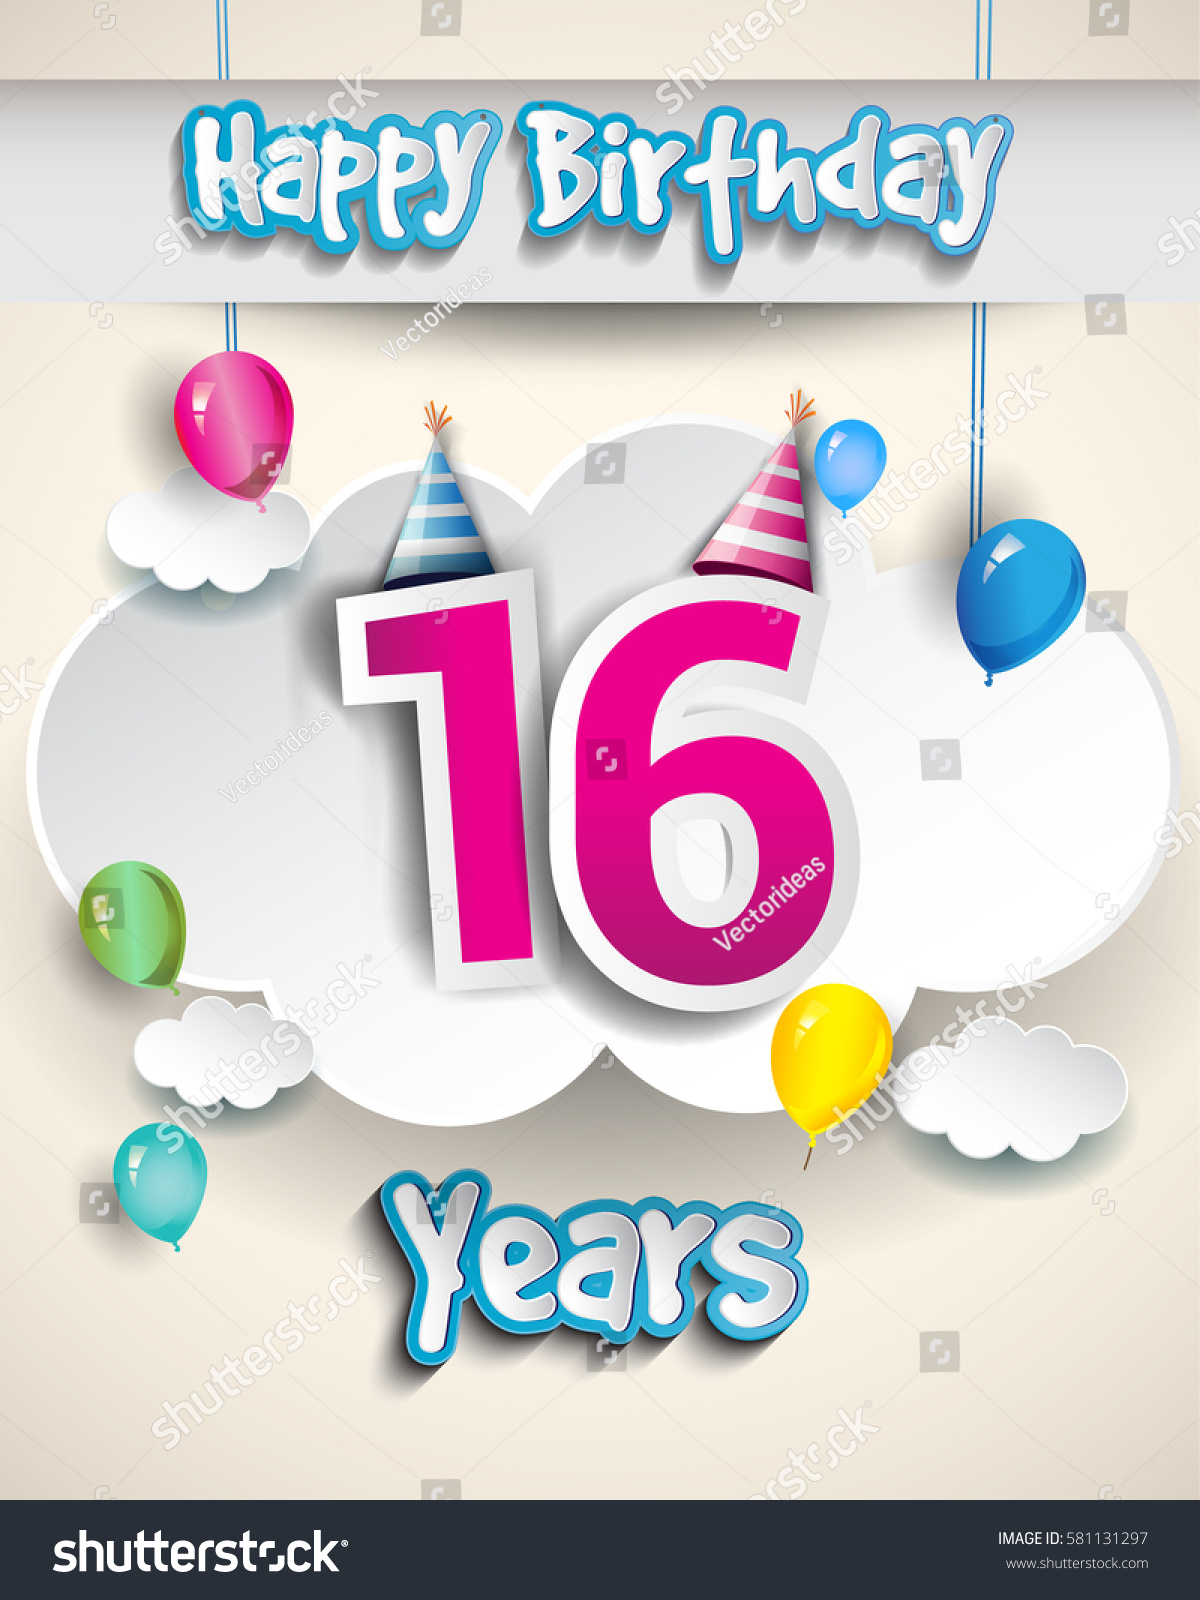 16th Birthday Celebration Design Clouds Balloons Stock Vector (Royalty ...